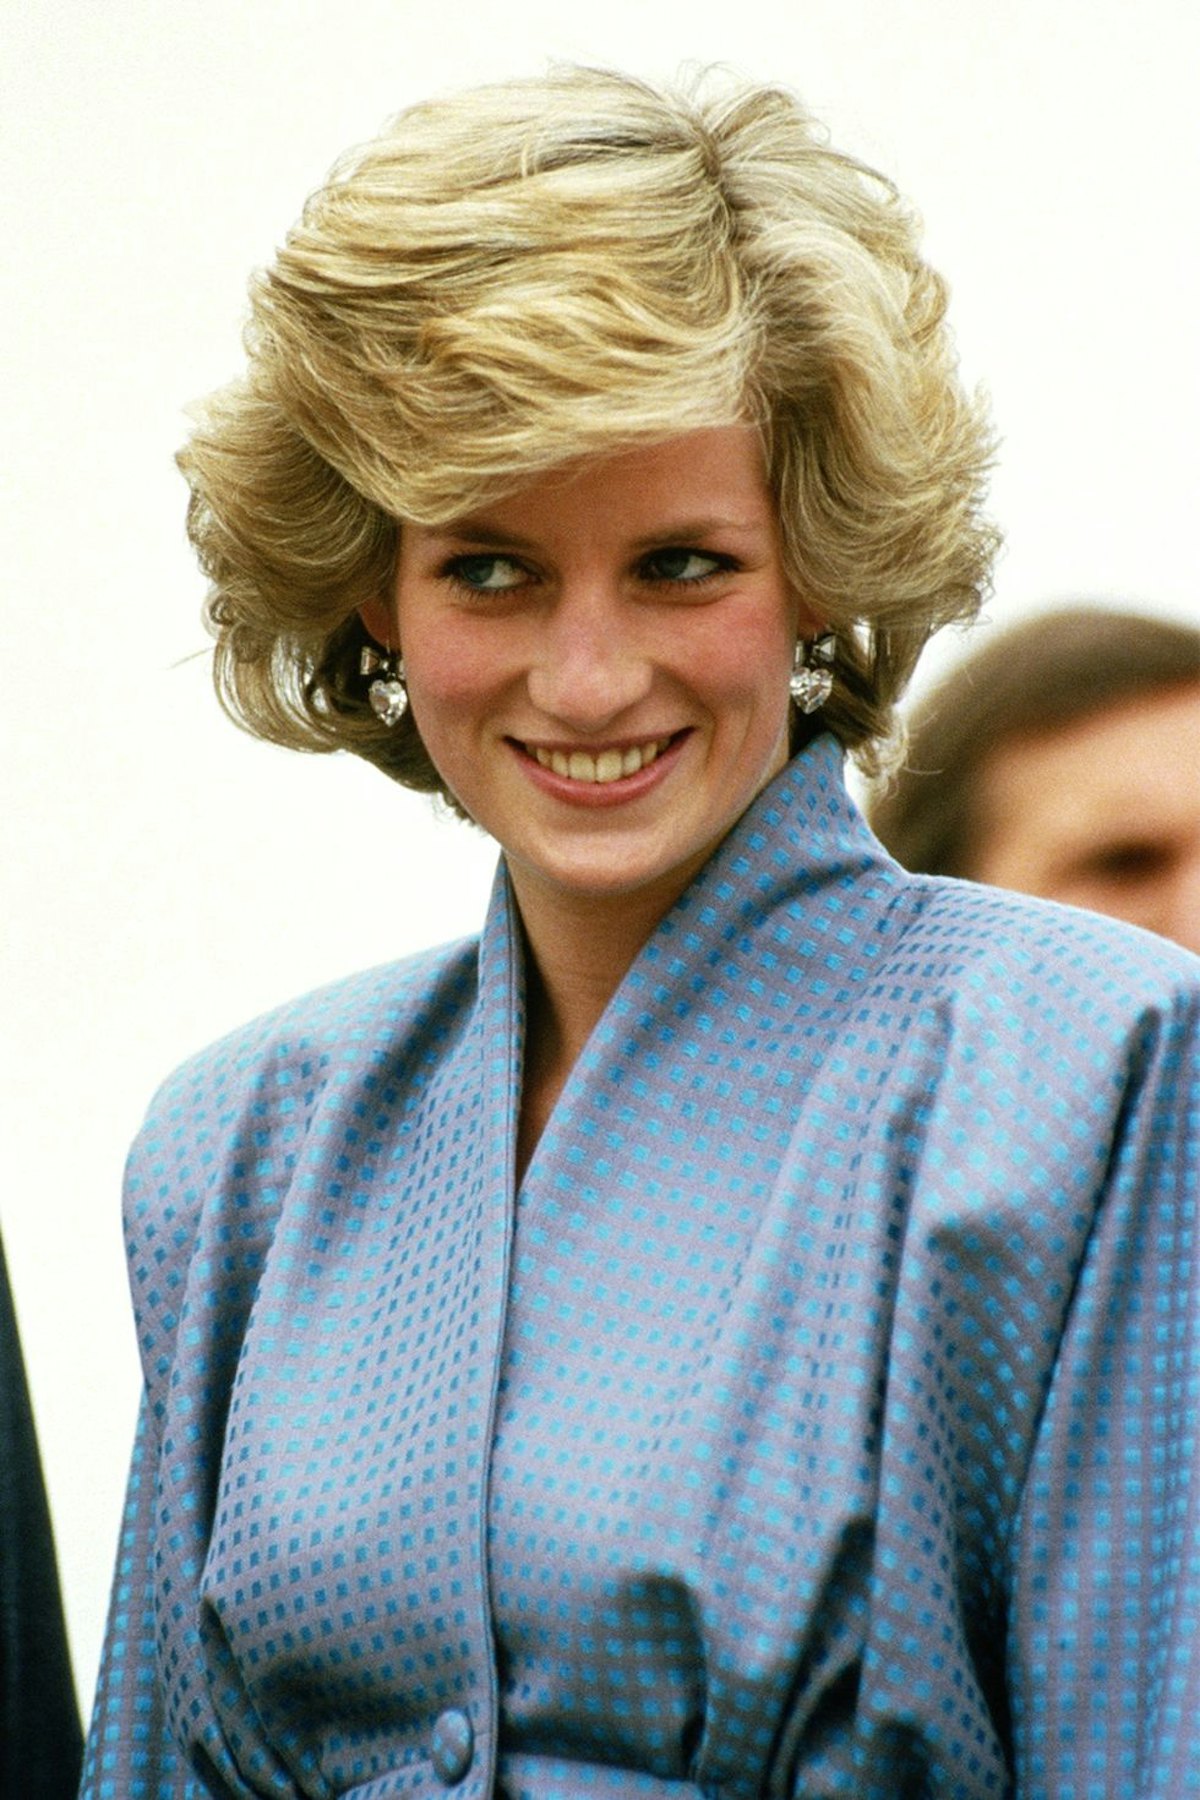 12 '80s Hairstyles That Are, Like, Totally Popular Again - Brit + Co